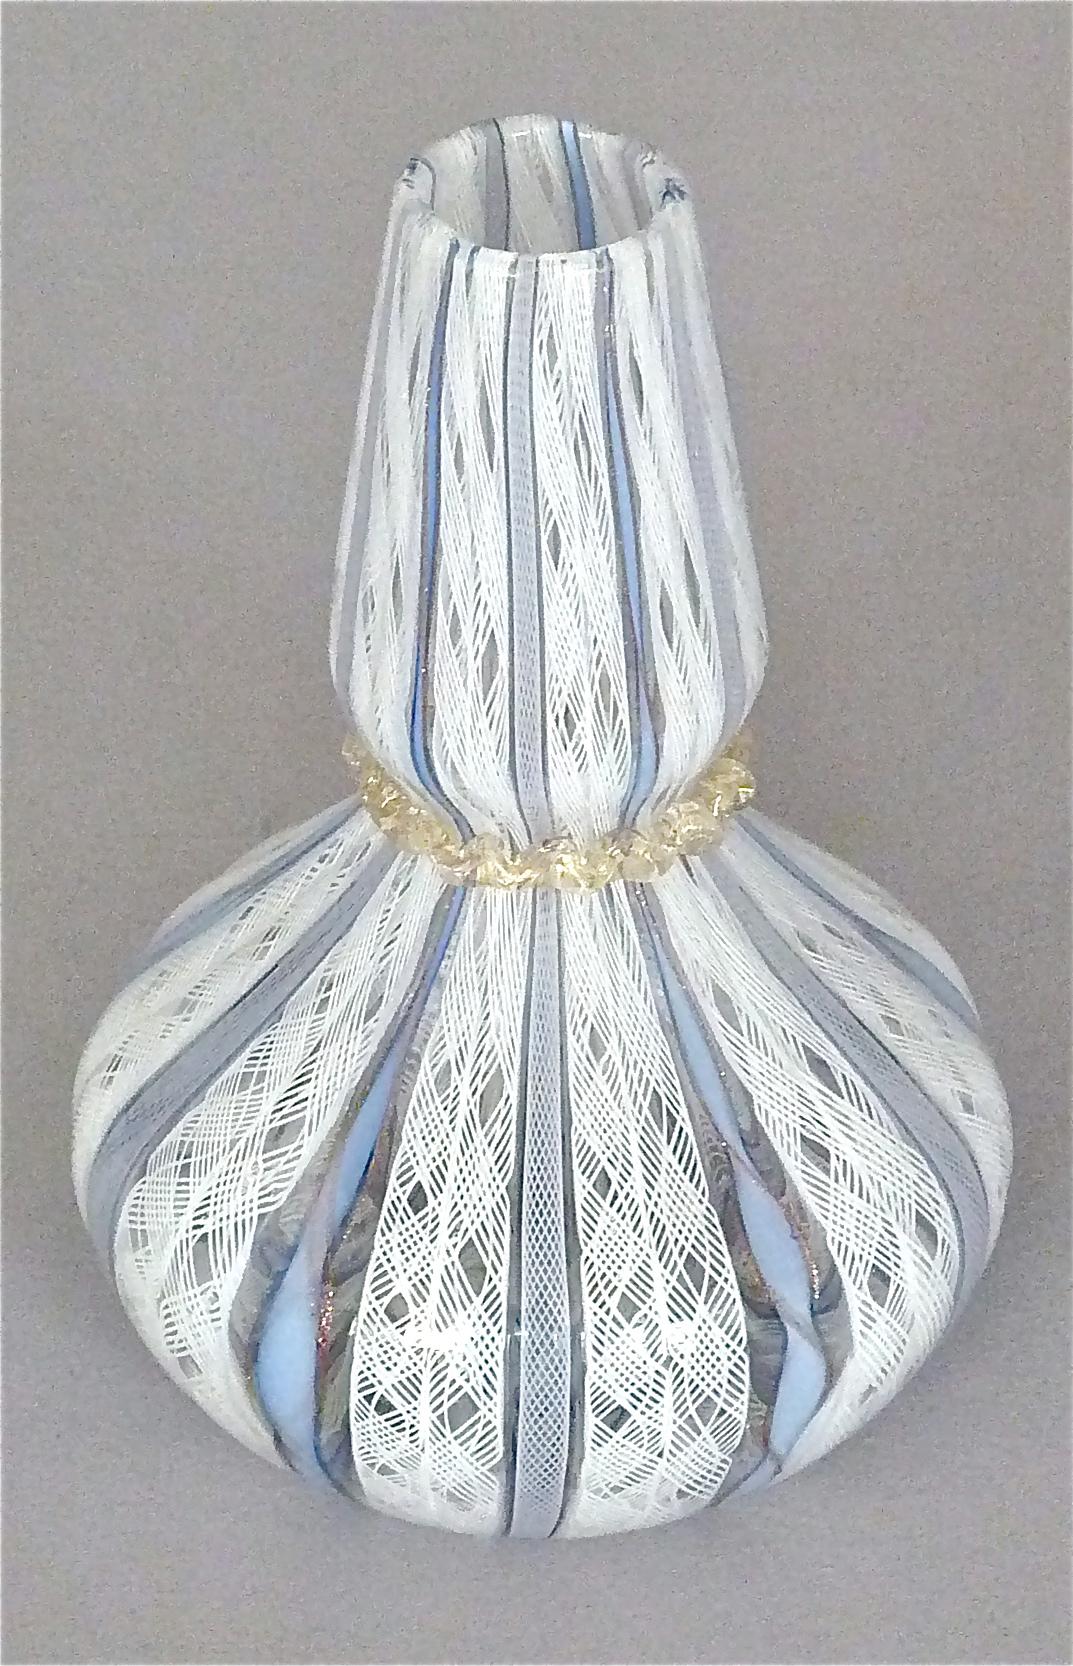 Dino Martens Vase for Aureliano Toso White Blue Murano Art Glass, Italy, 1950s For Sale 1